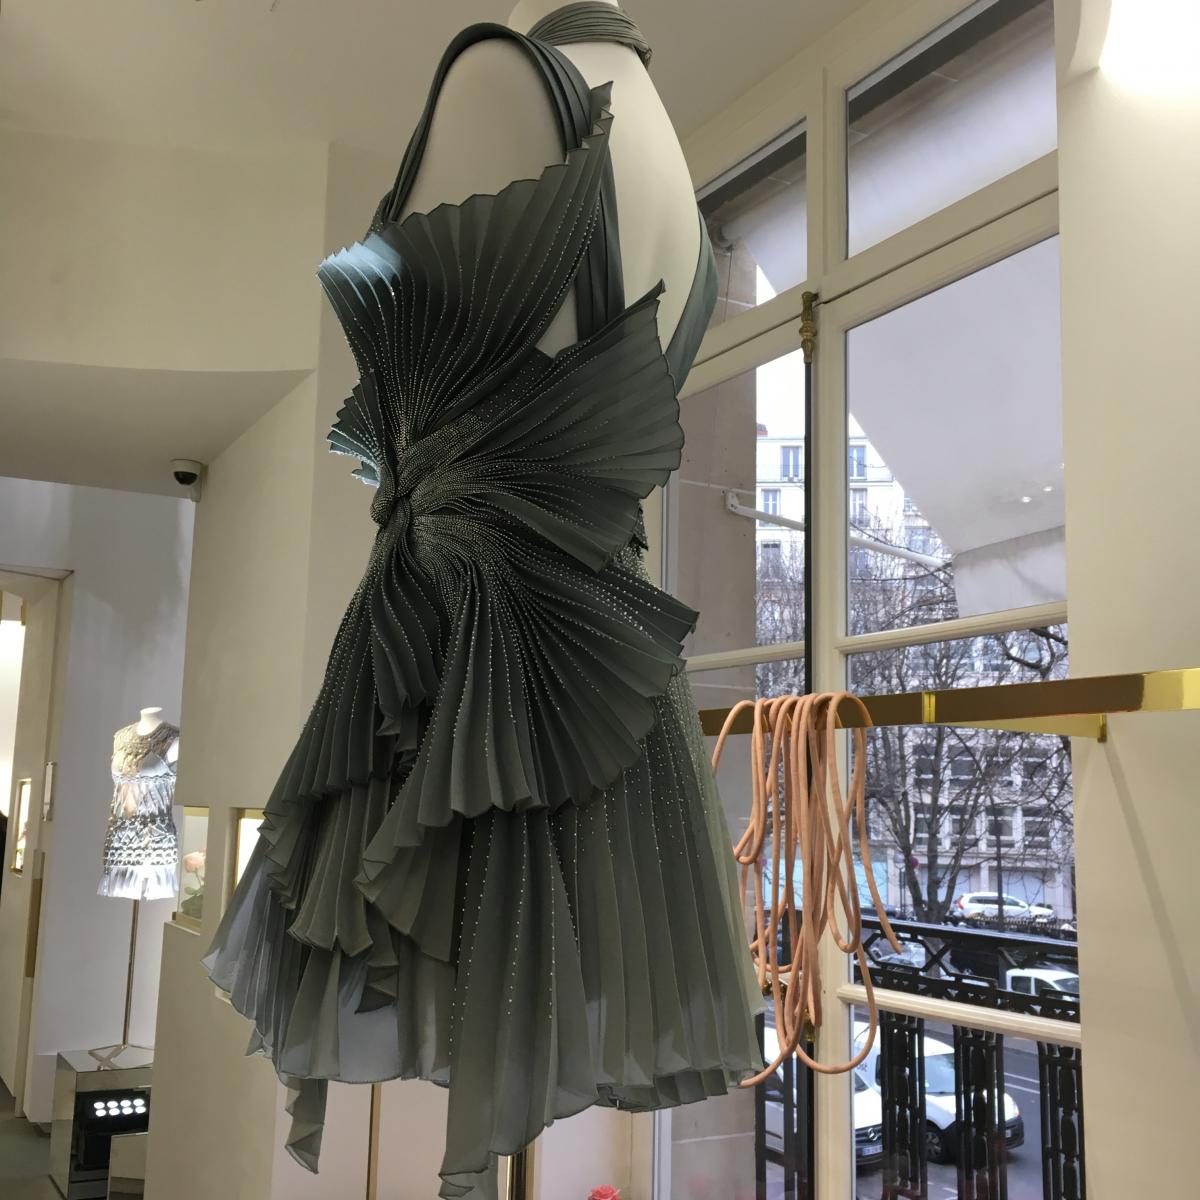 Versace Atelier ss2017 as shown in their showroom on Avenue Montaigne in Paris